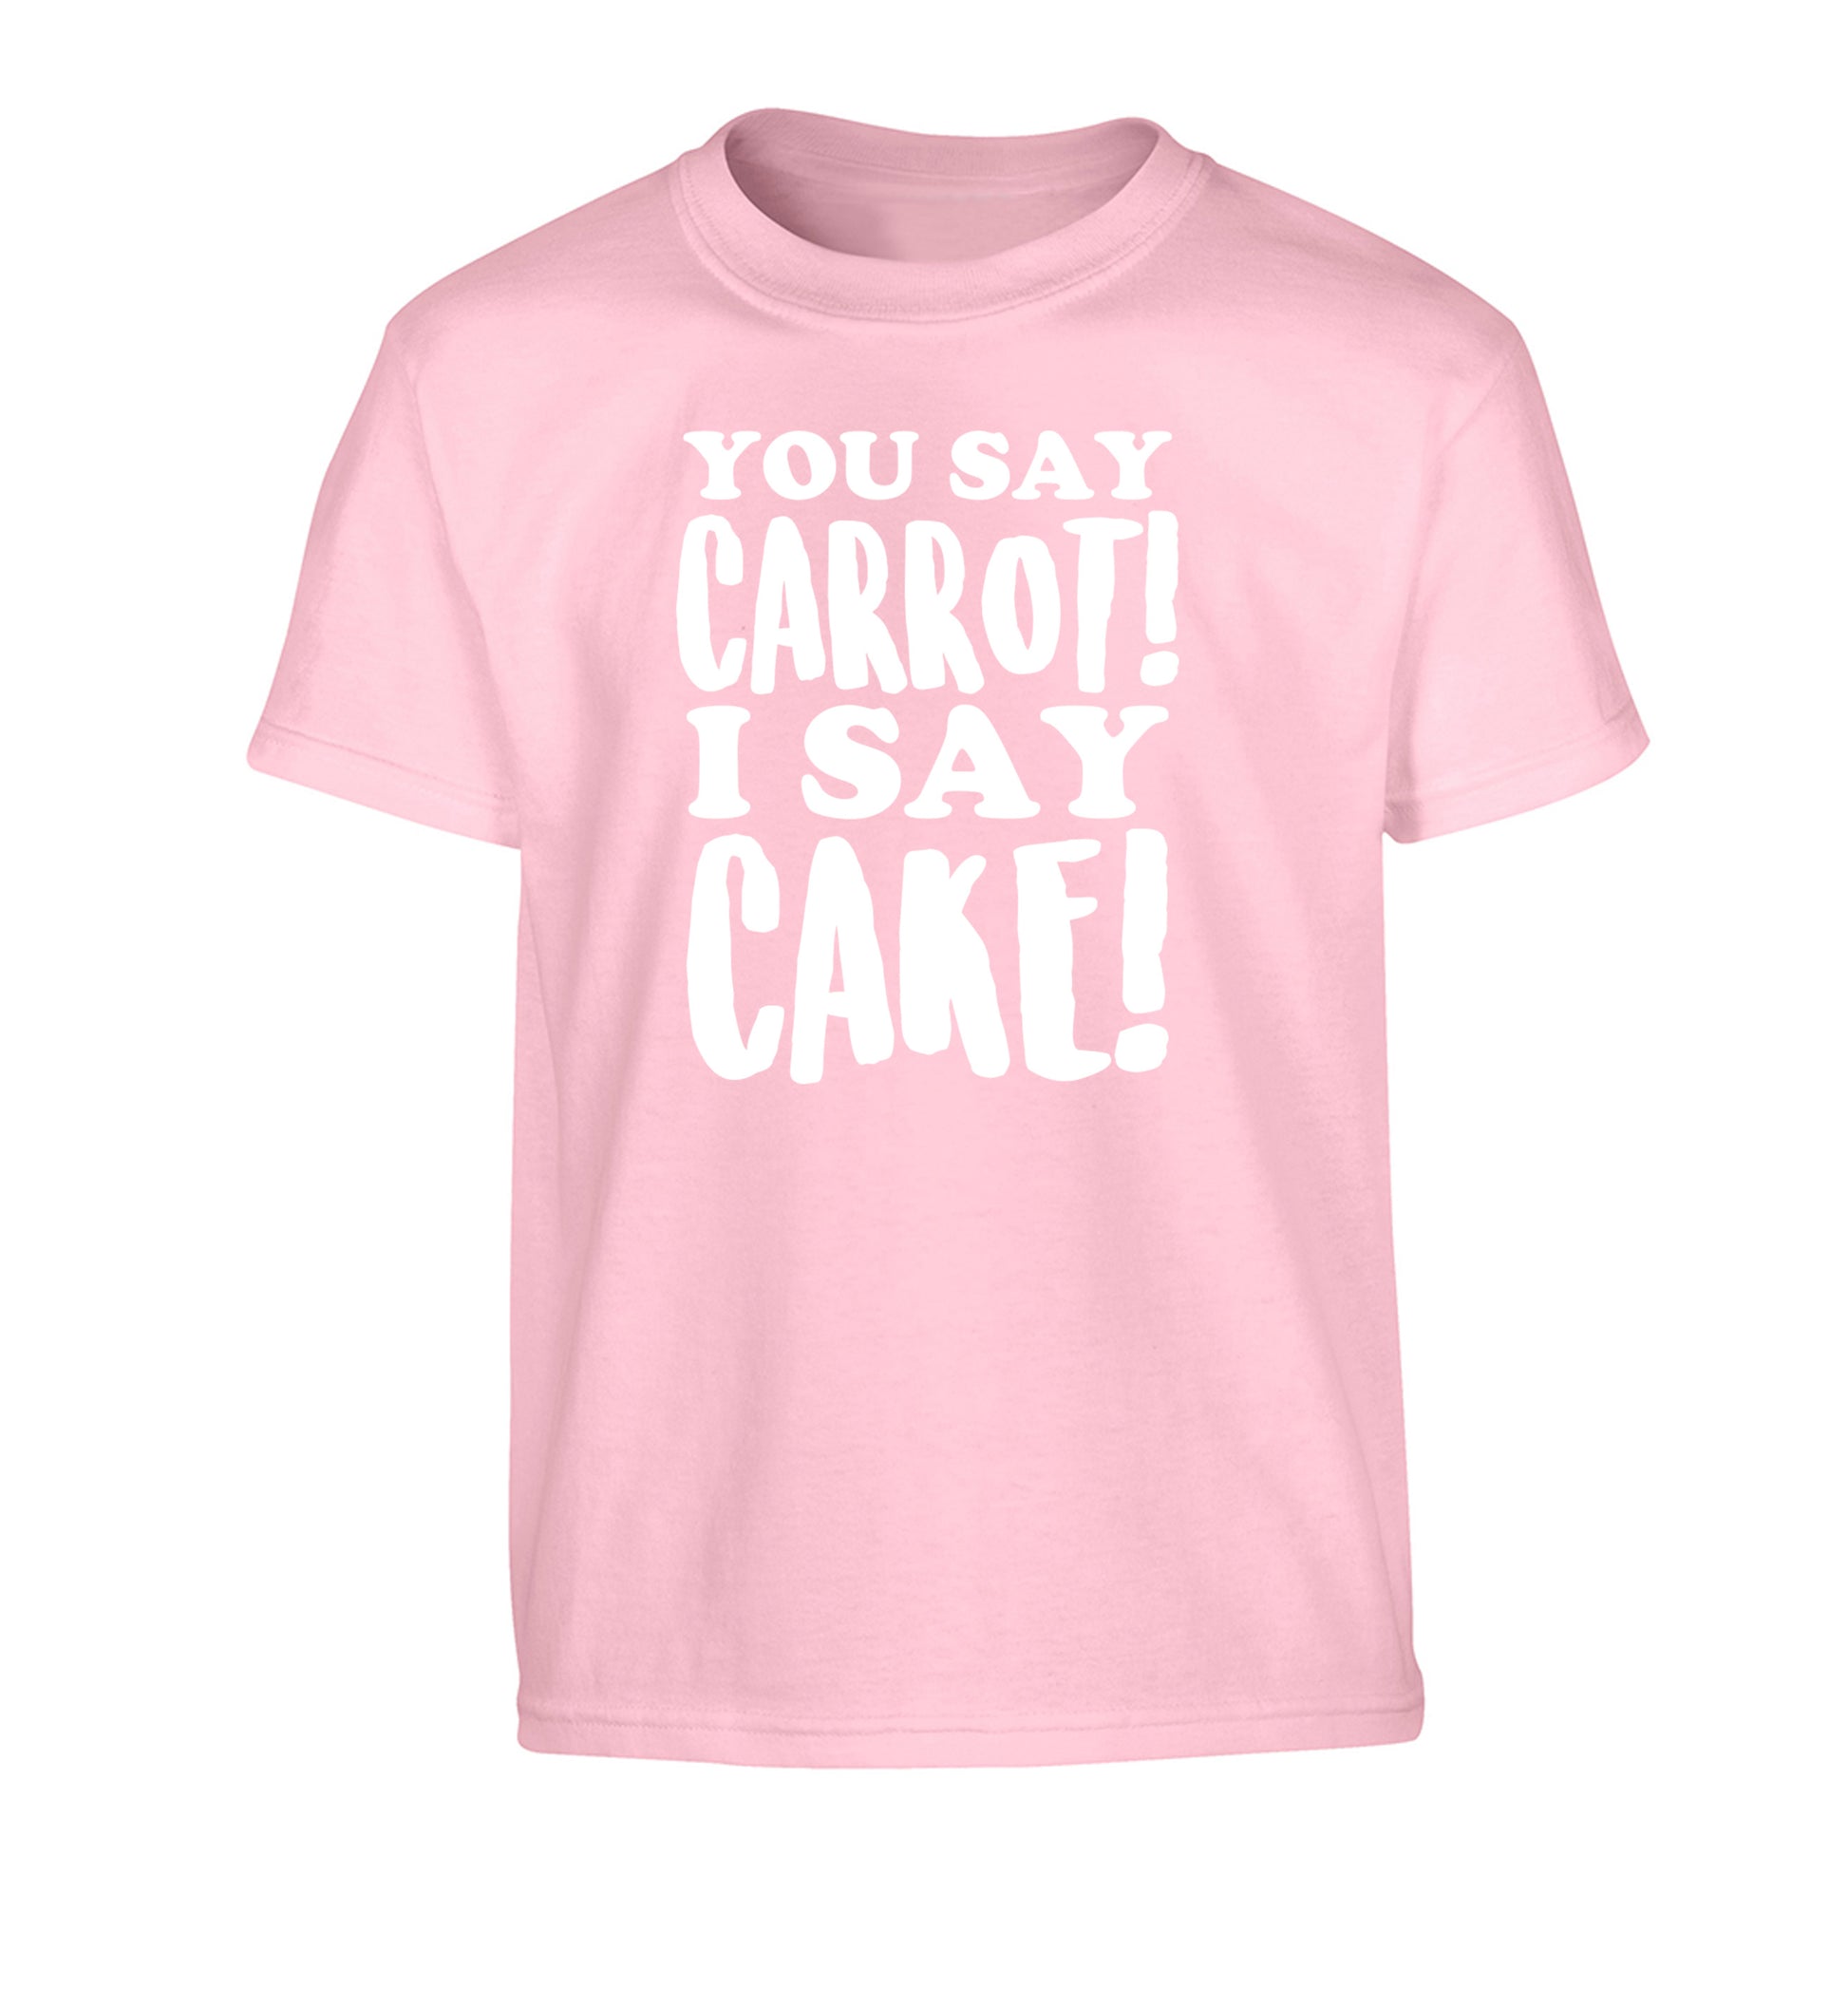 You say carrot I say cake! Children's light pink Tshirt 12-14 Years